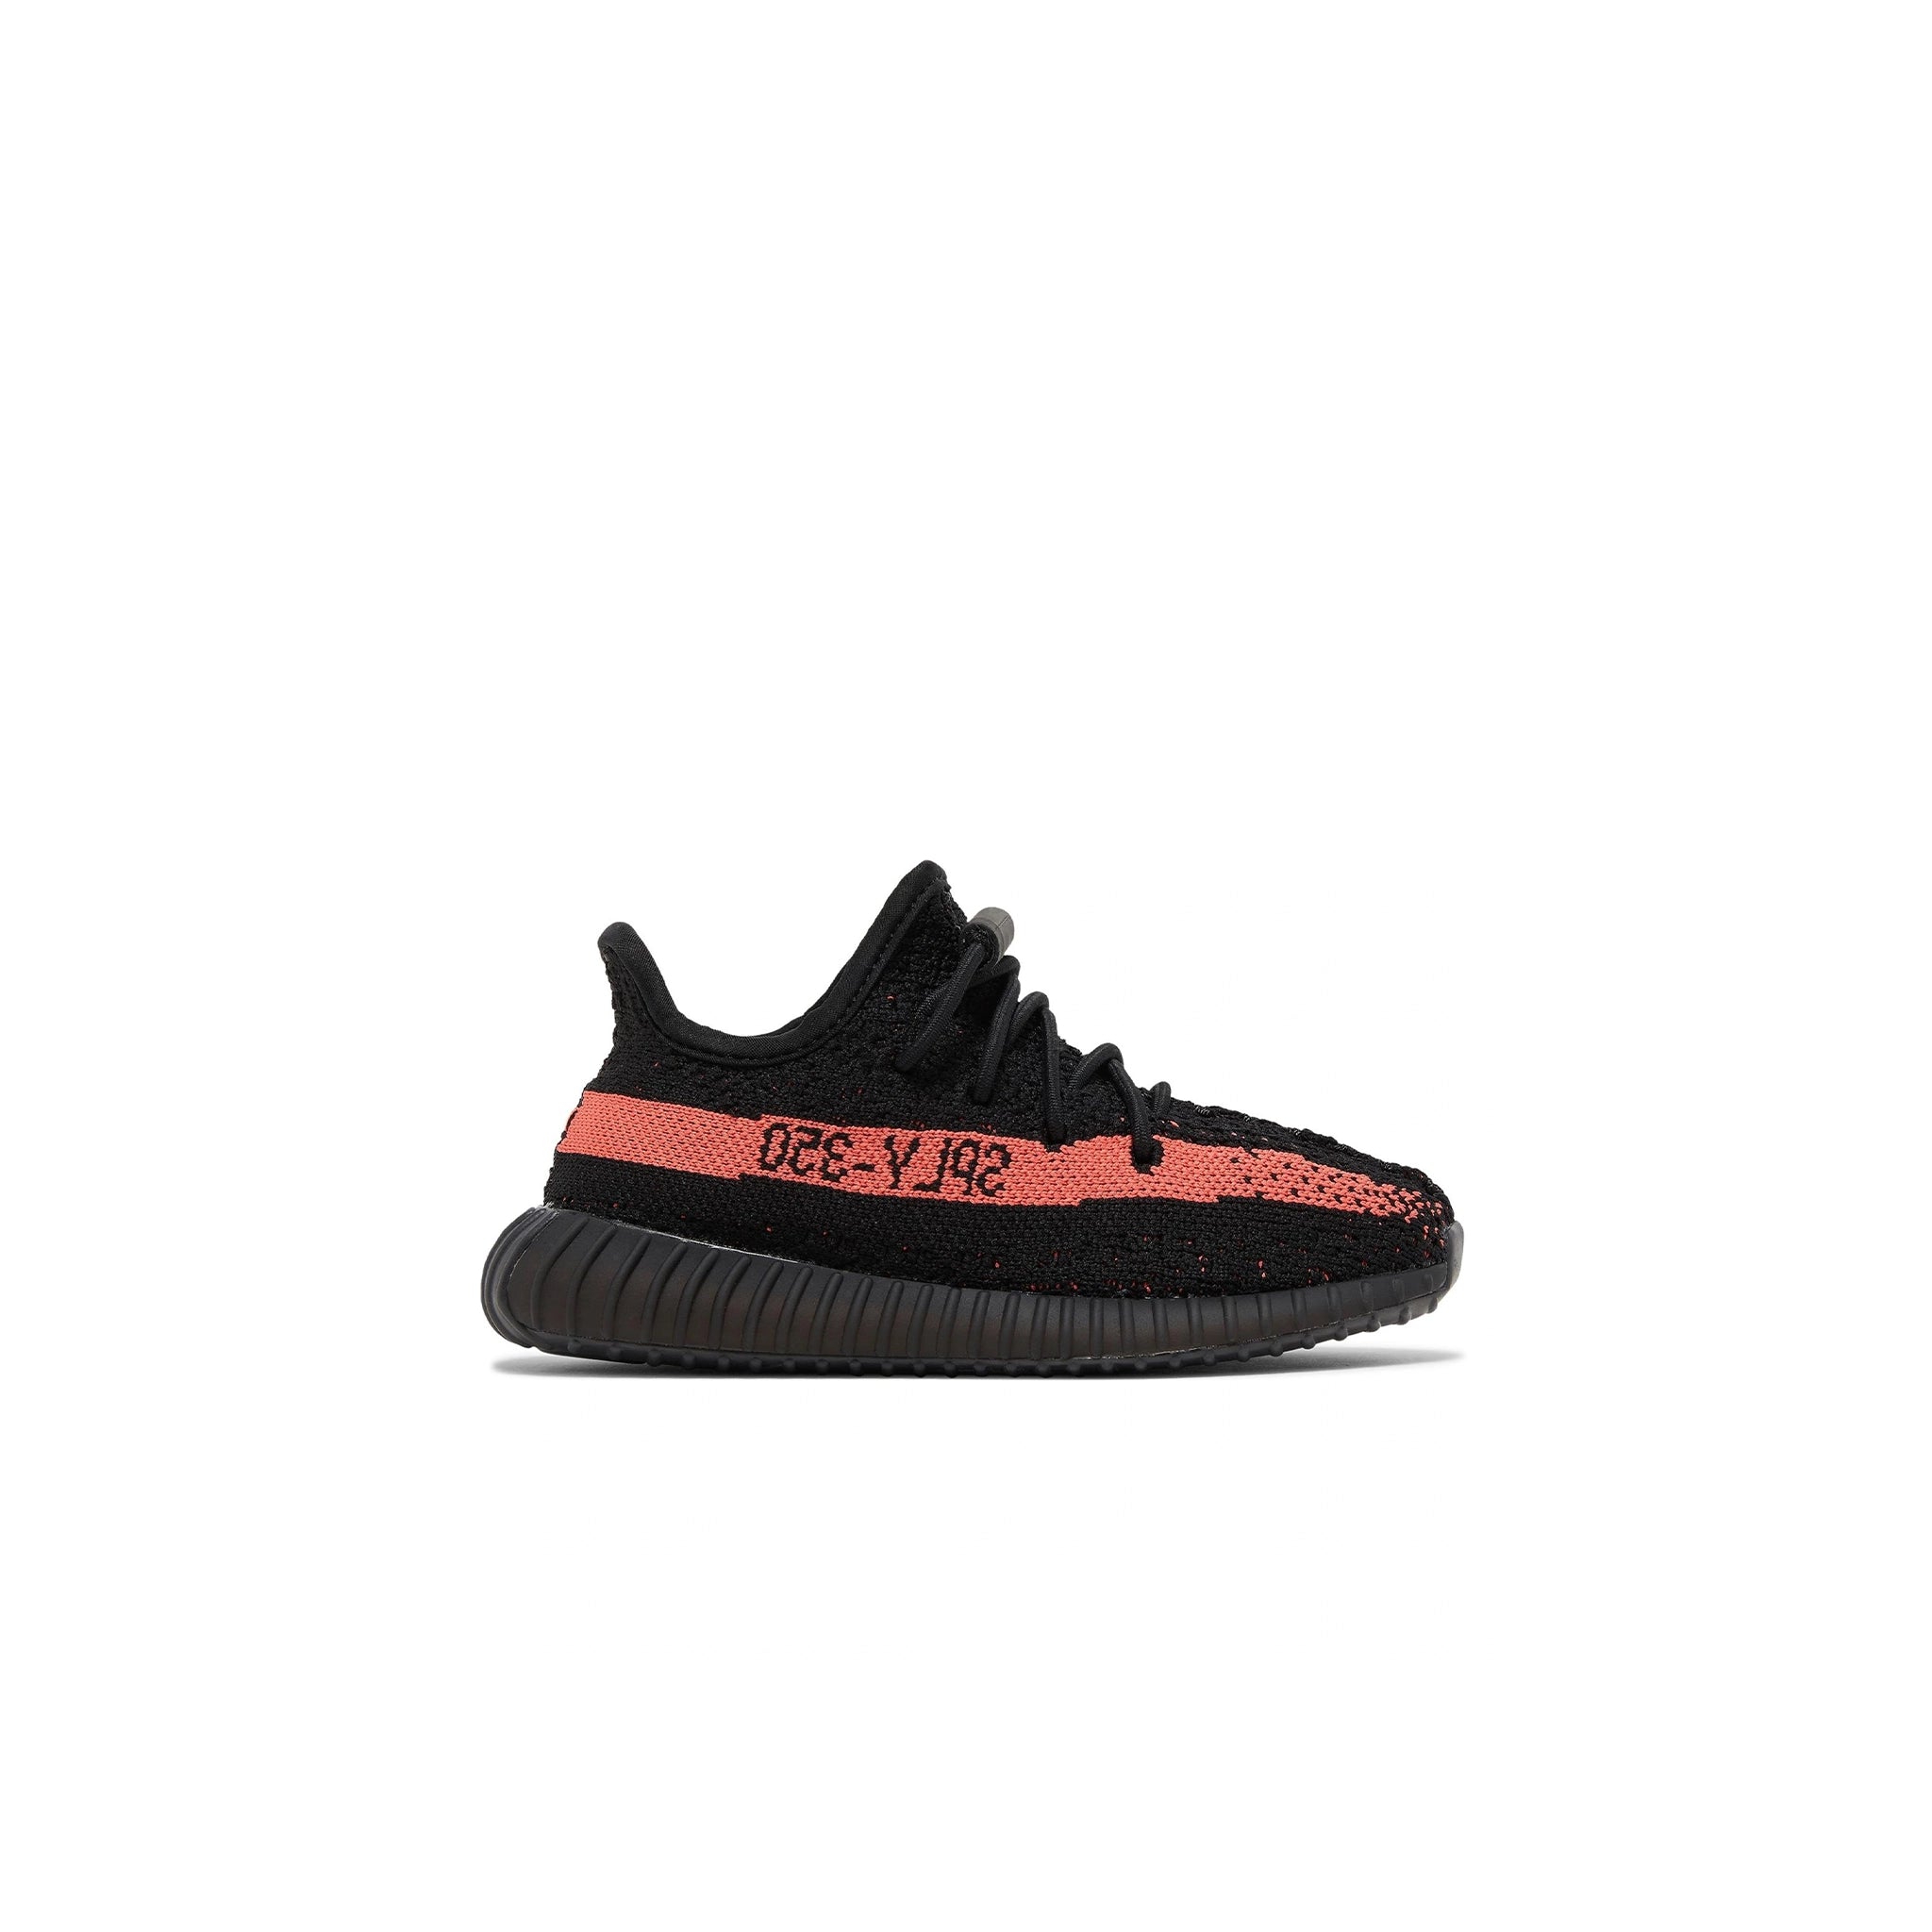 adidas yeezy boost 350 v2 infants core black red hp6587 side